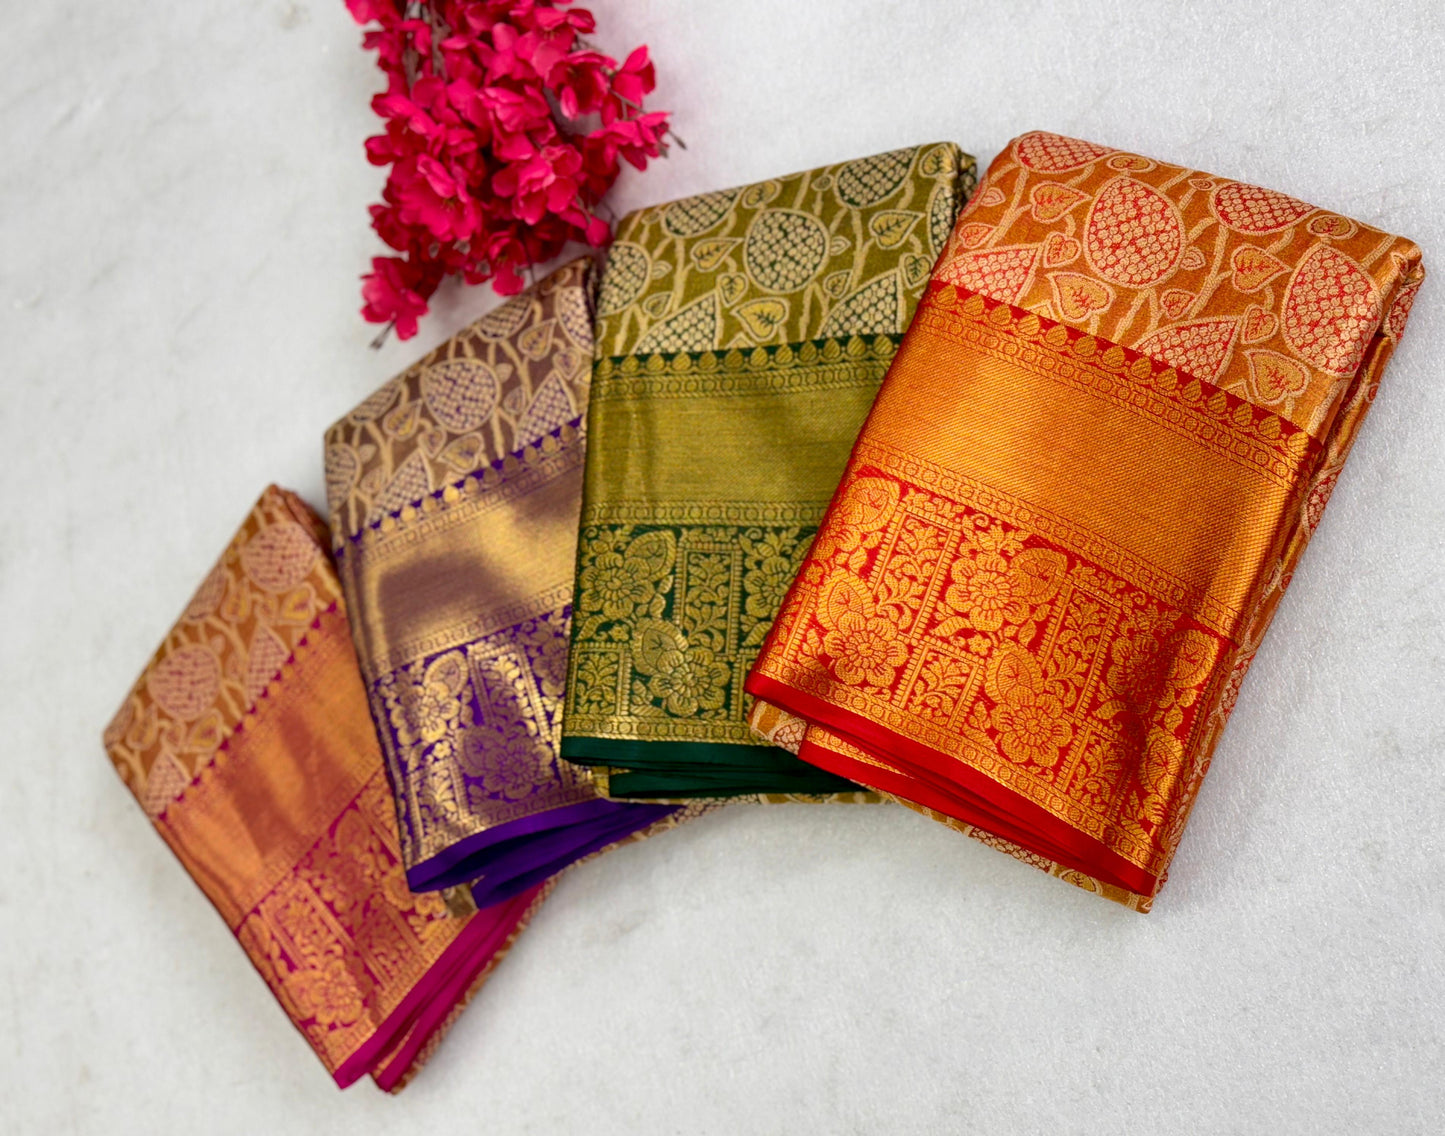 New Premium And High Quality Kanjiveram Soft and Smooth Silk Saree That is Super Stylish and Pretty